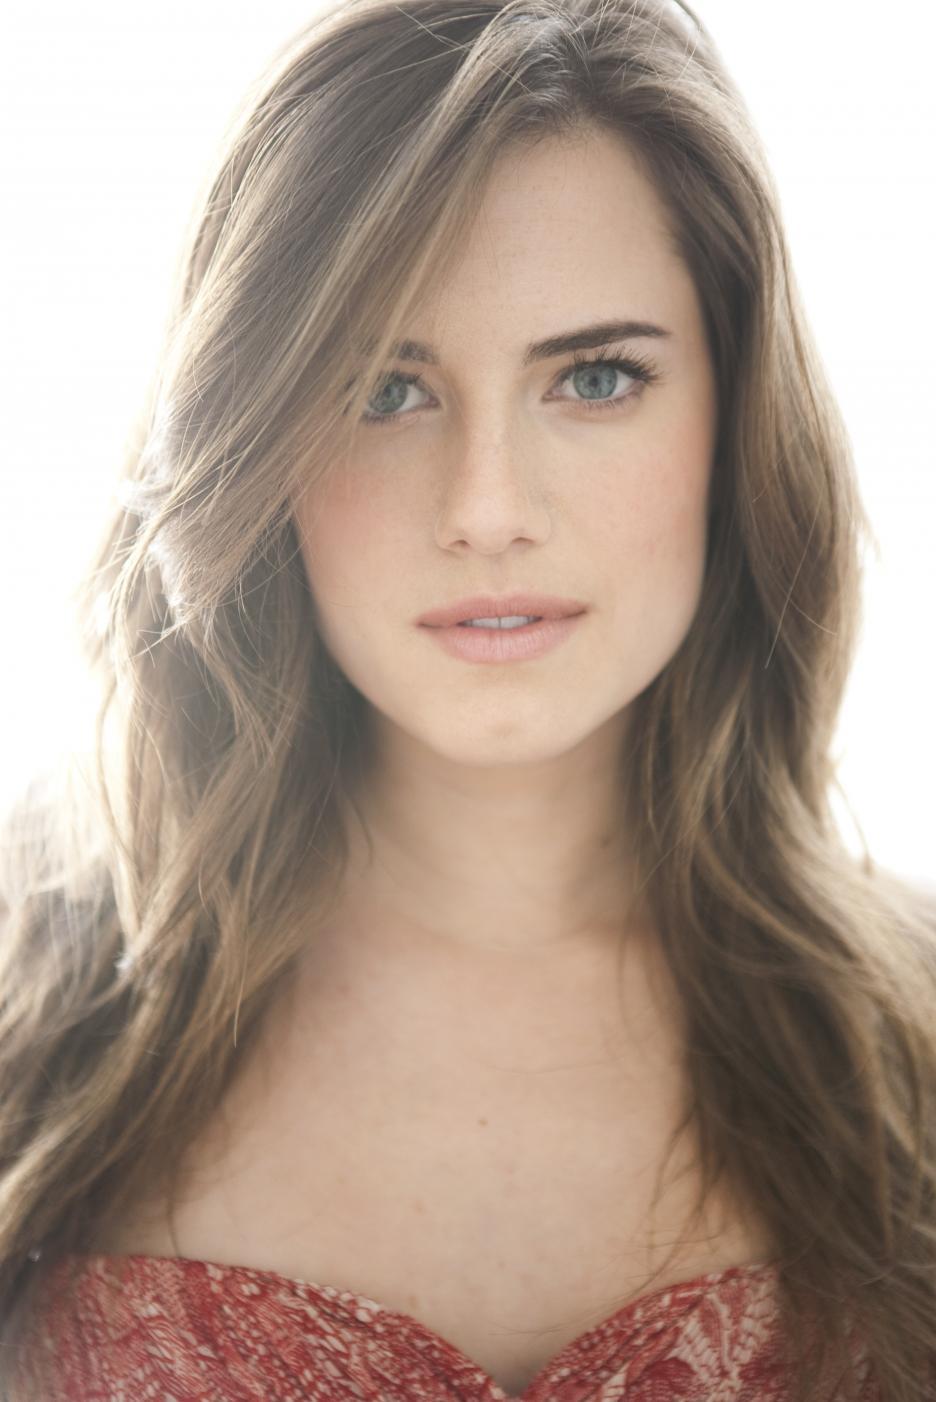 Hot Picture Of Allison Williams Are Gift From God To Humans